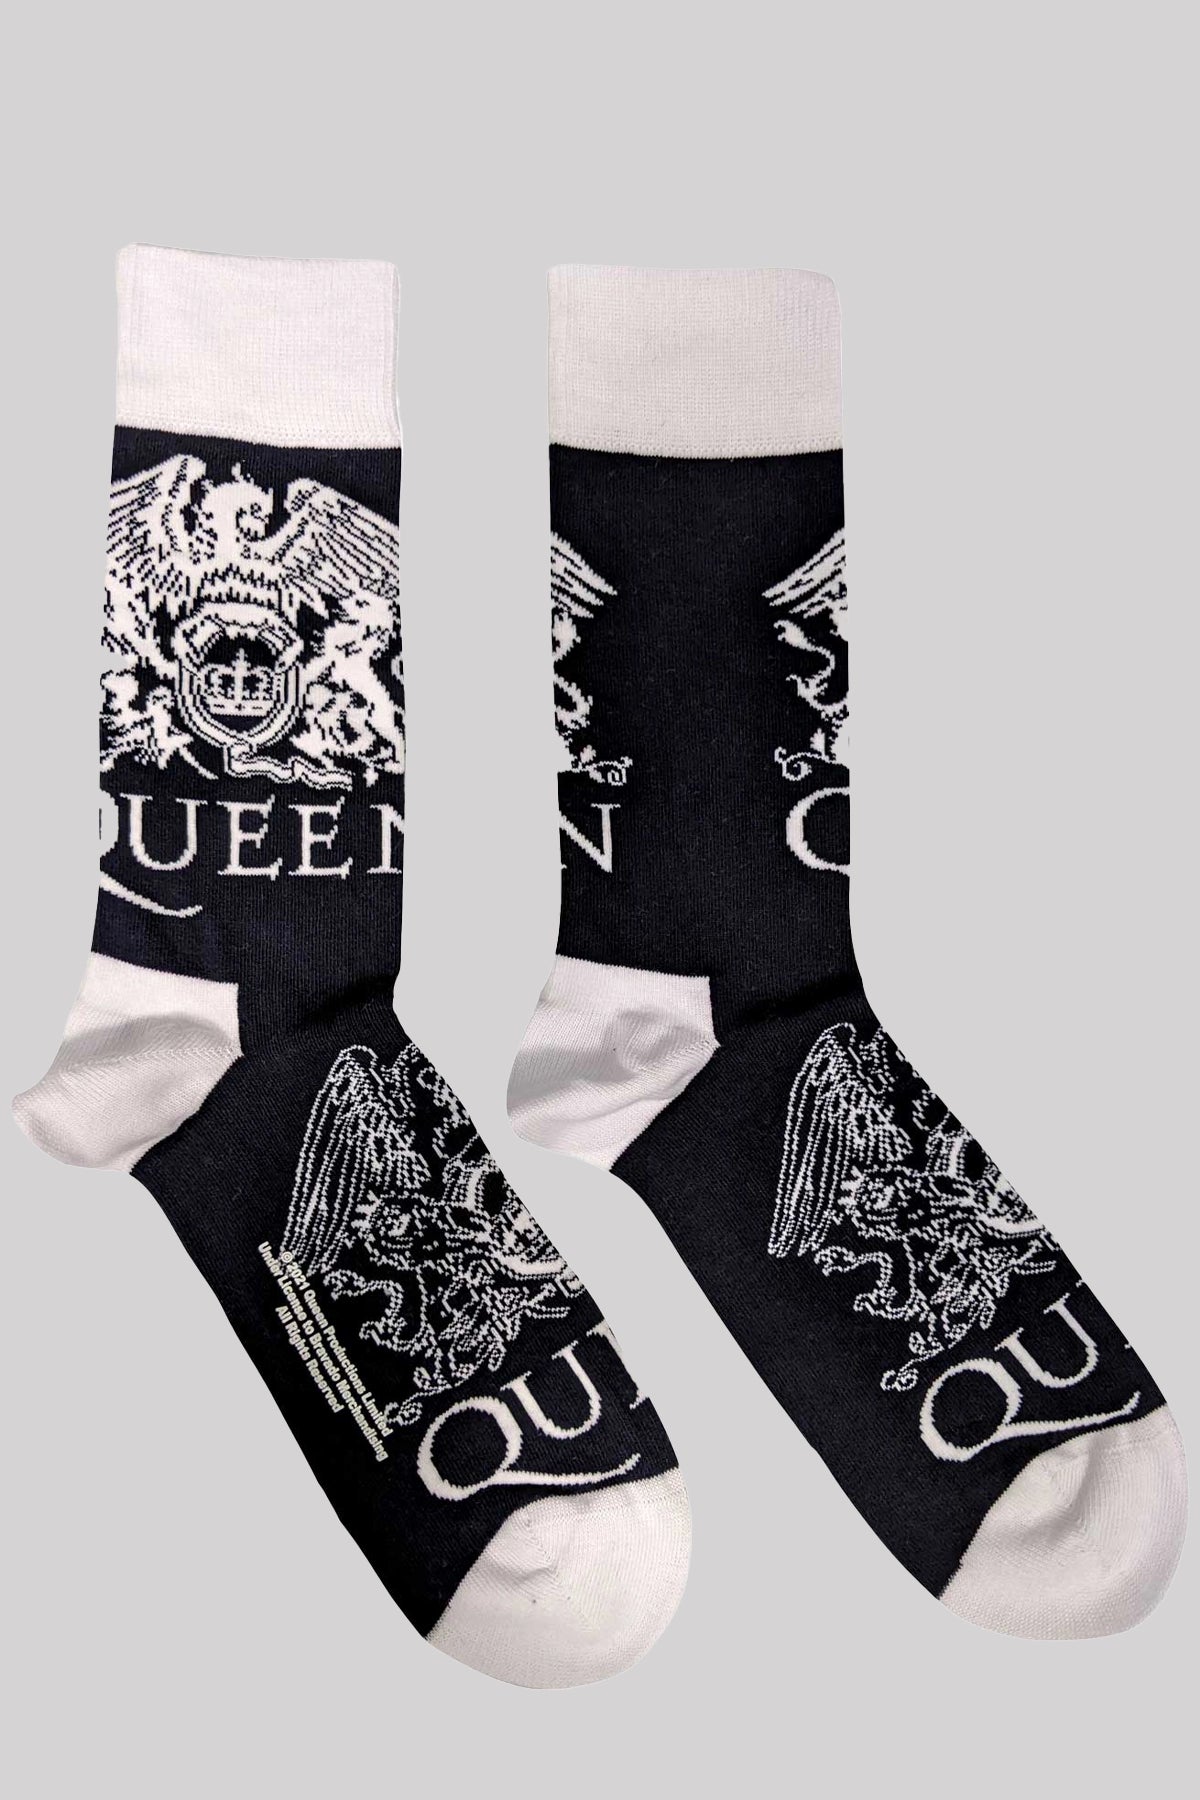 Queen Unisex Ankle Socks: White Crests Official Band Merch